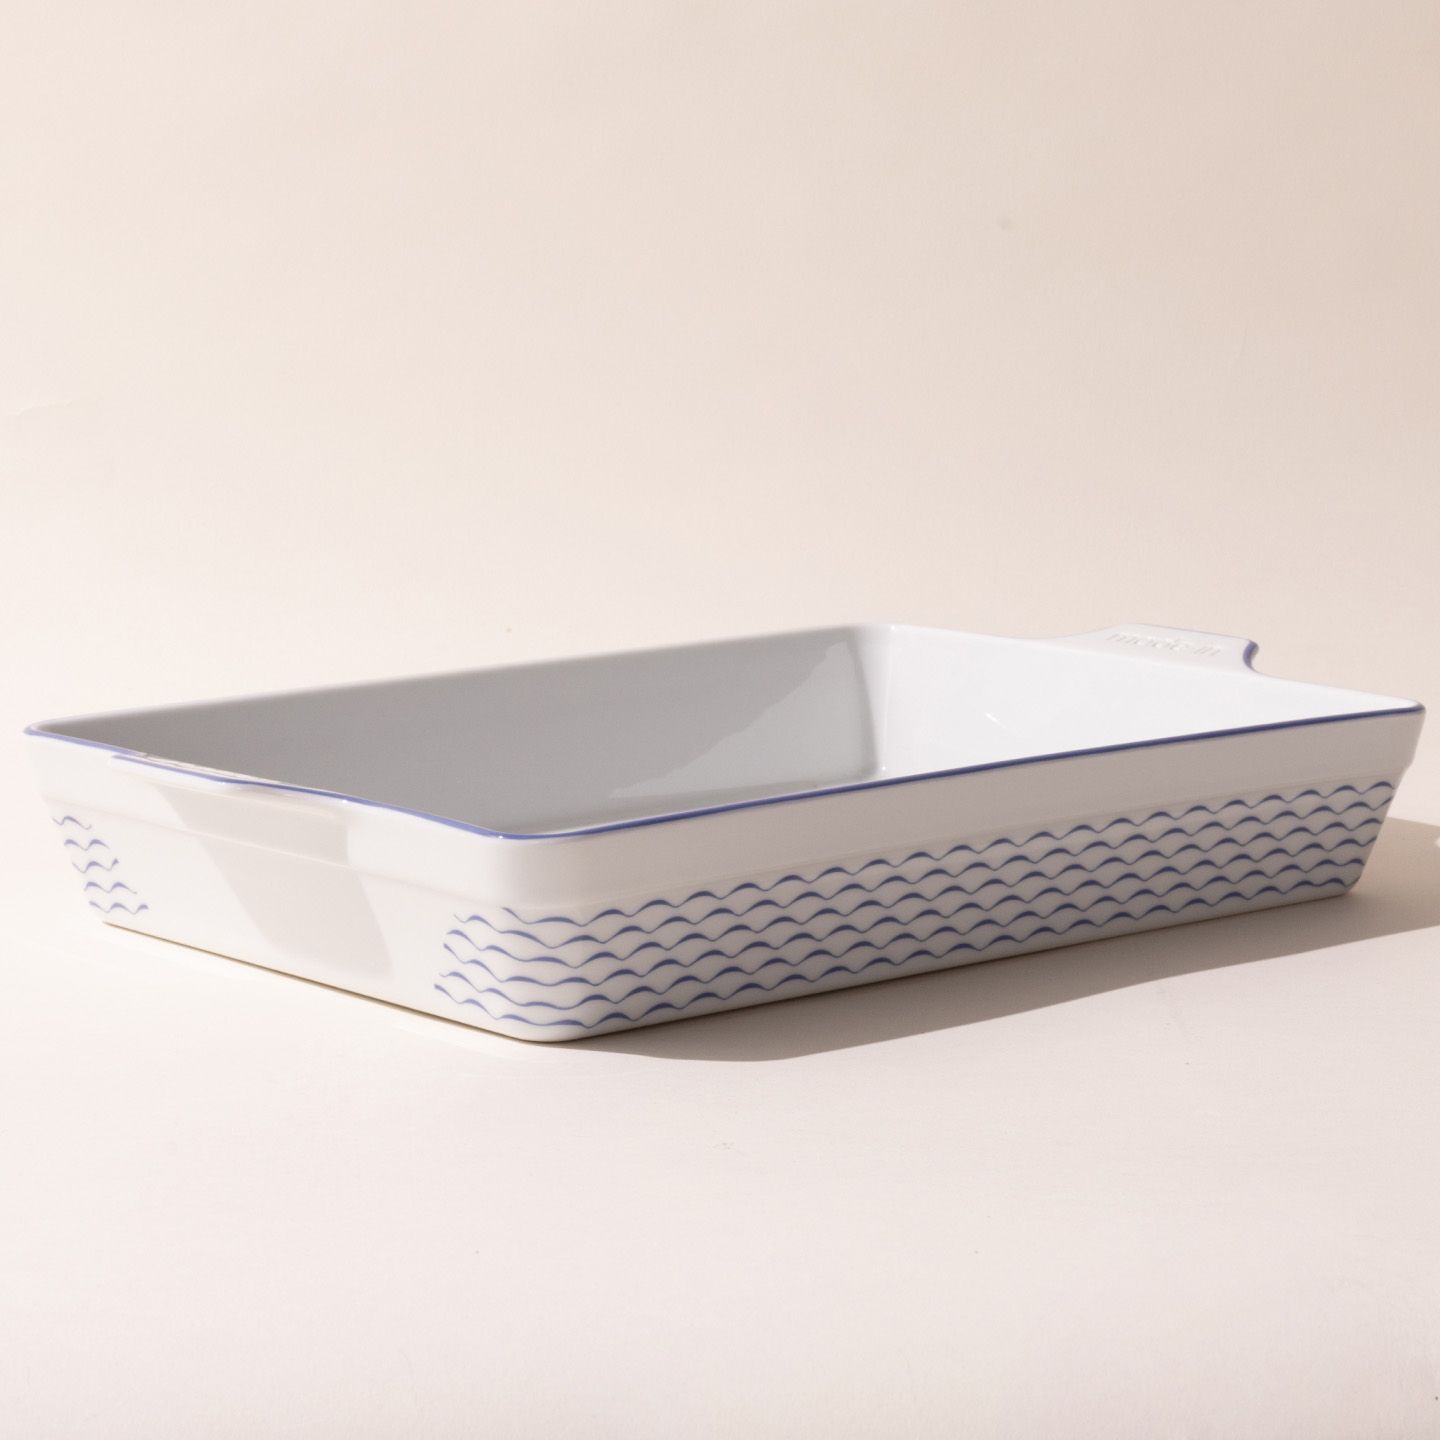 Made in Cookware – 9x13 Baking Dish